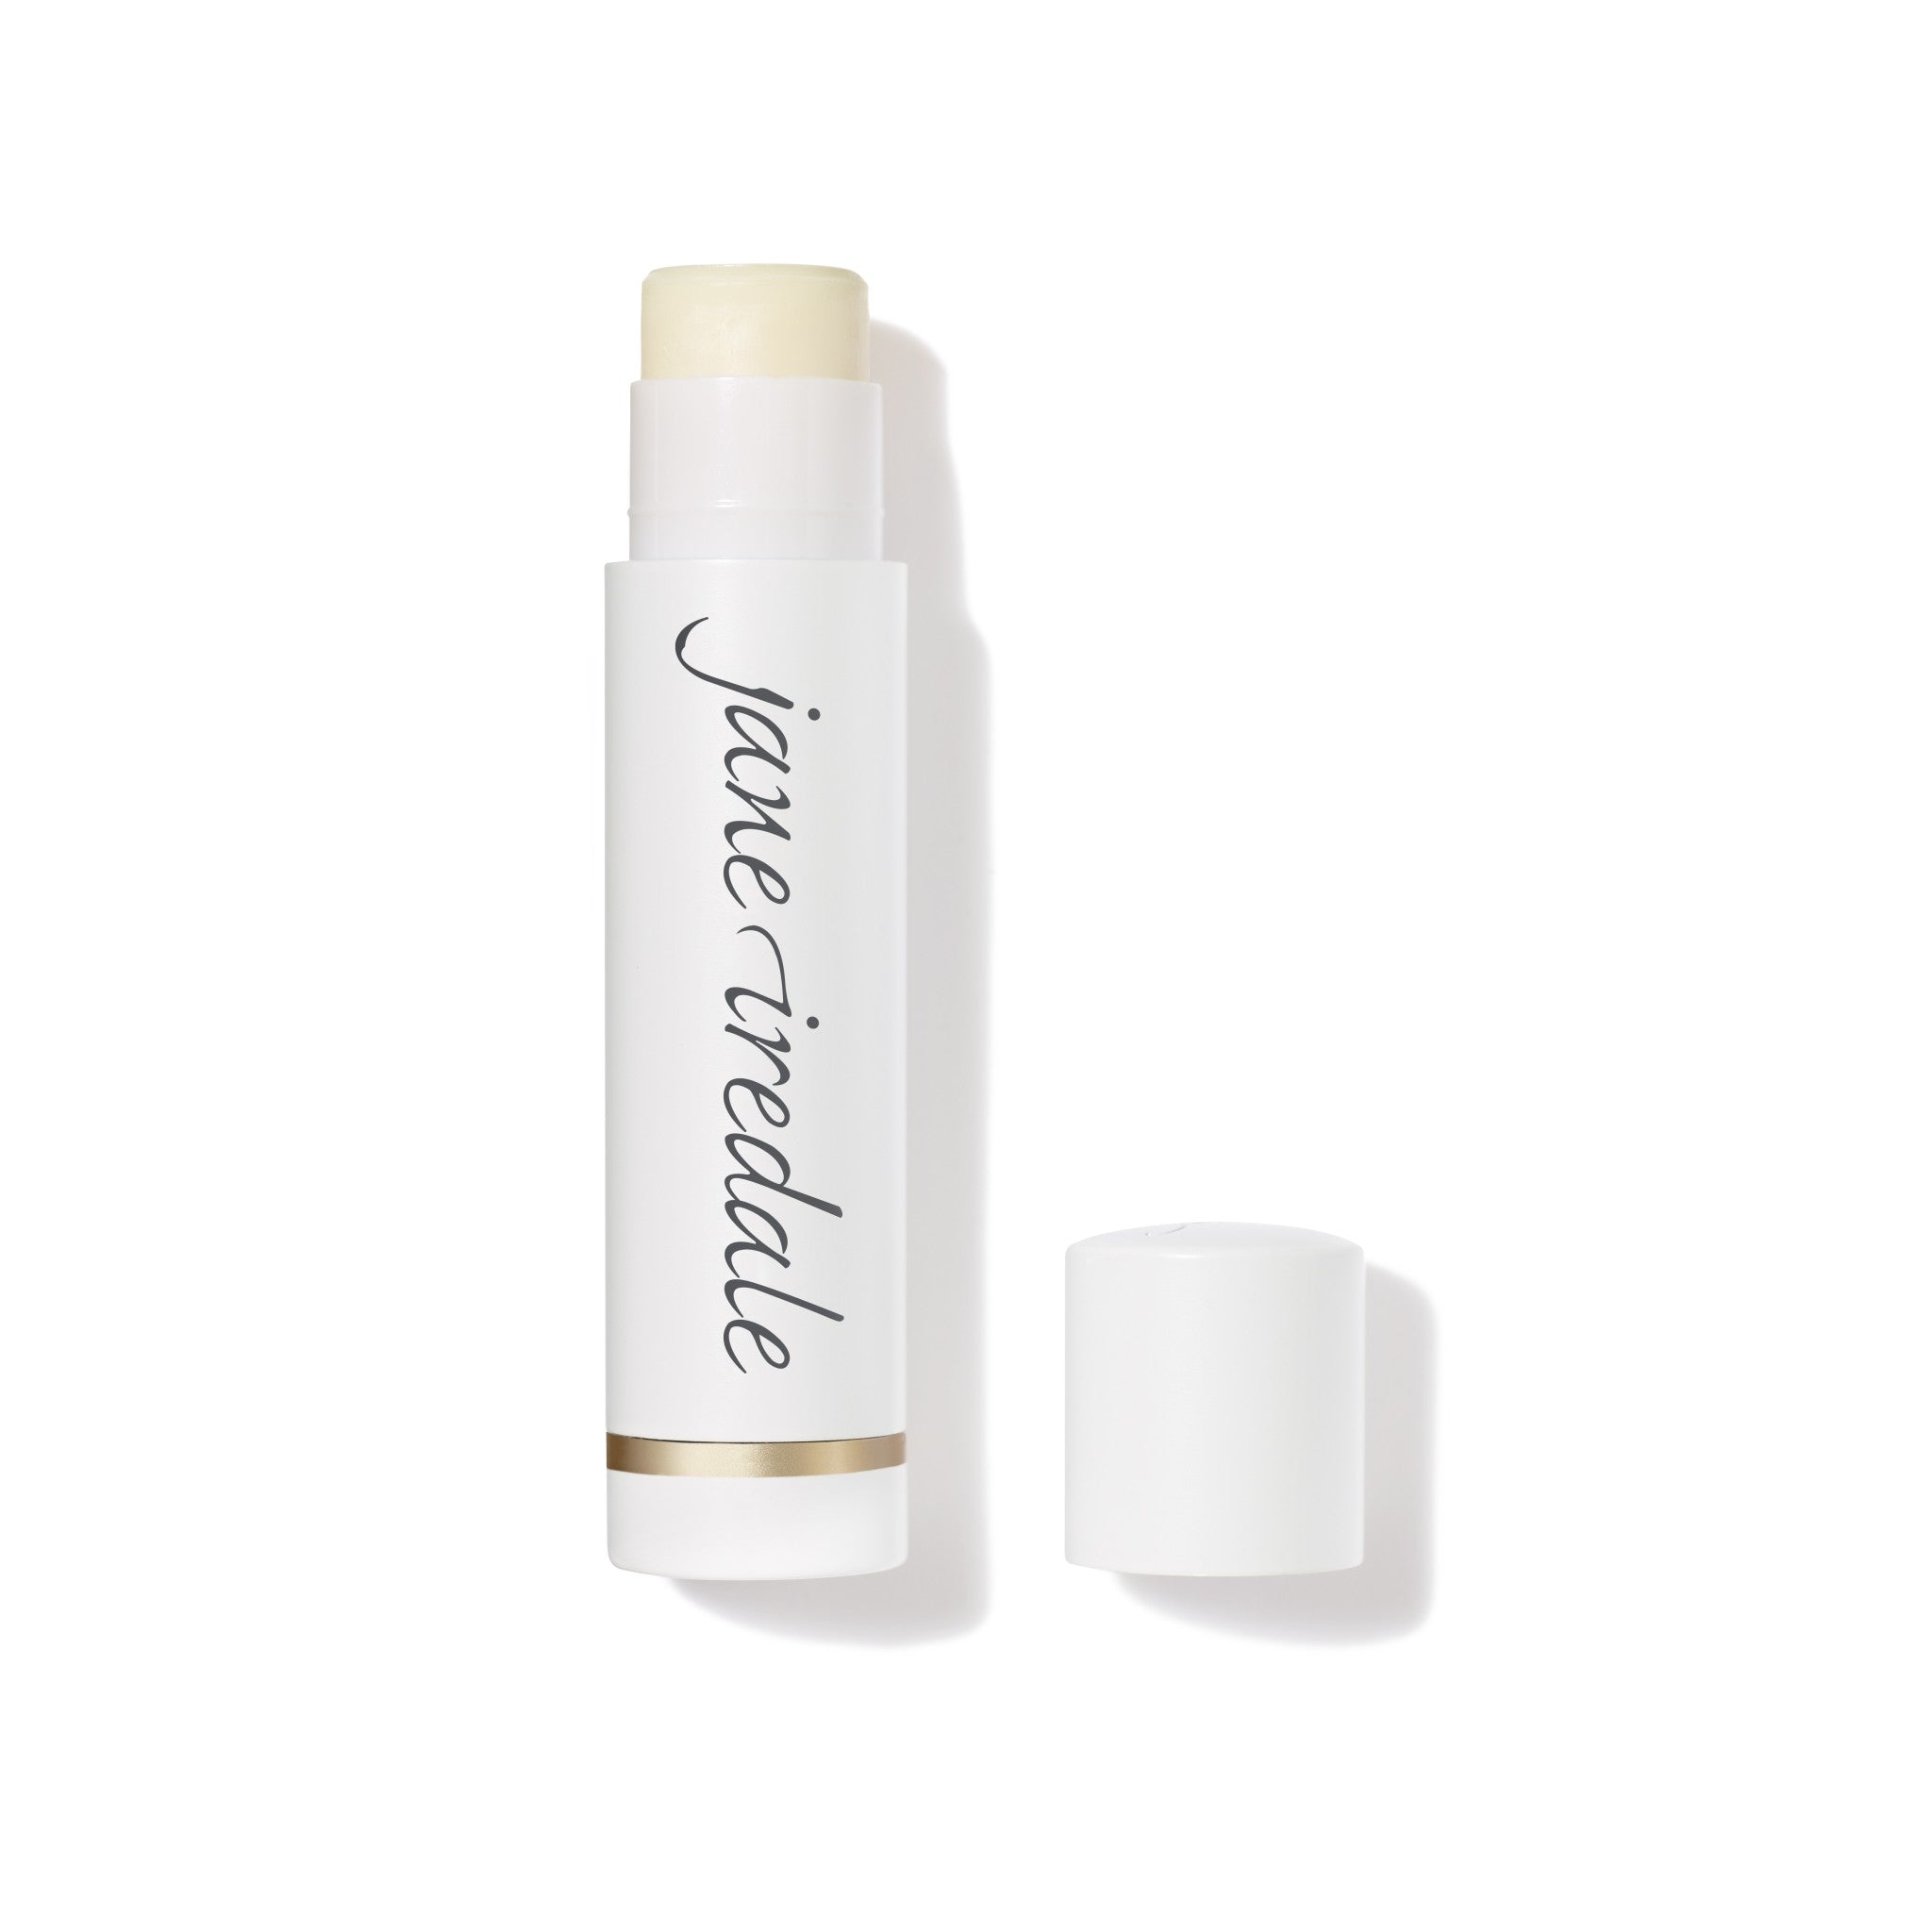 Jane Iredale Lipdrink Lip Balm Color/Shade variant: Sheer main image. This product is in the color nude